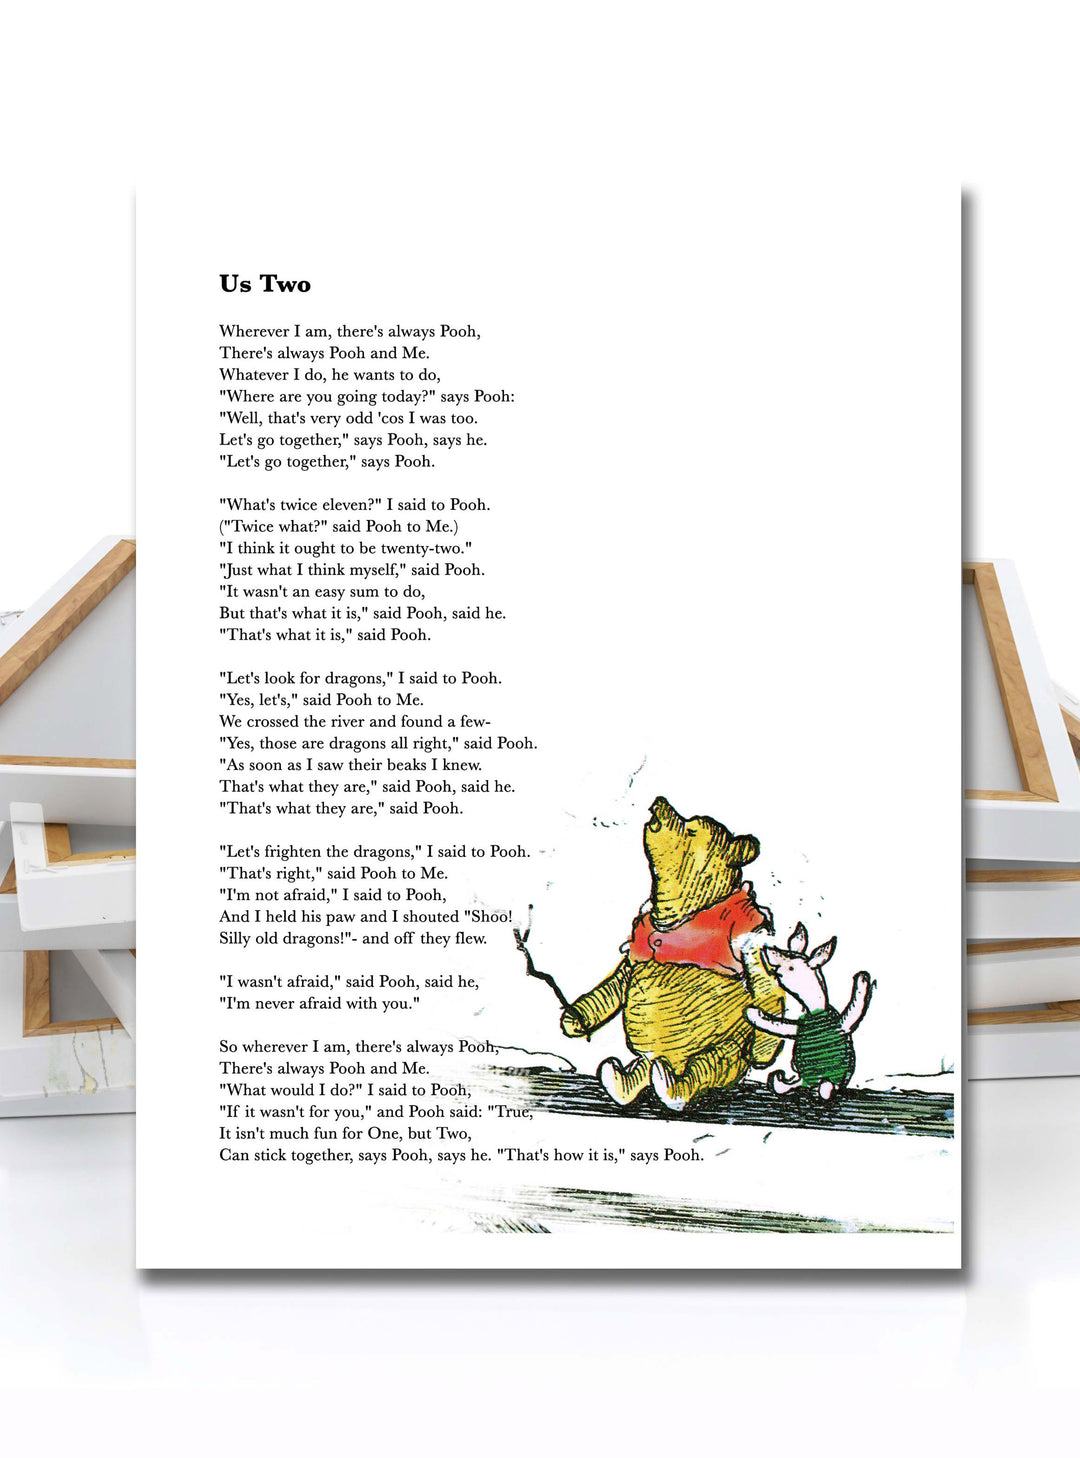 Winnie The Pooh Wall Art Canvas, Us Two, poem by A. A. Milne